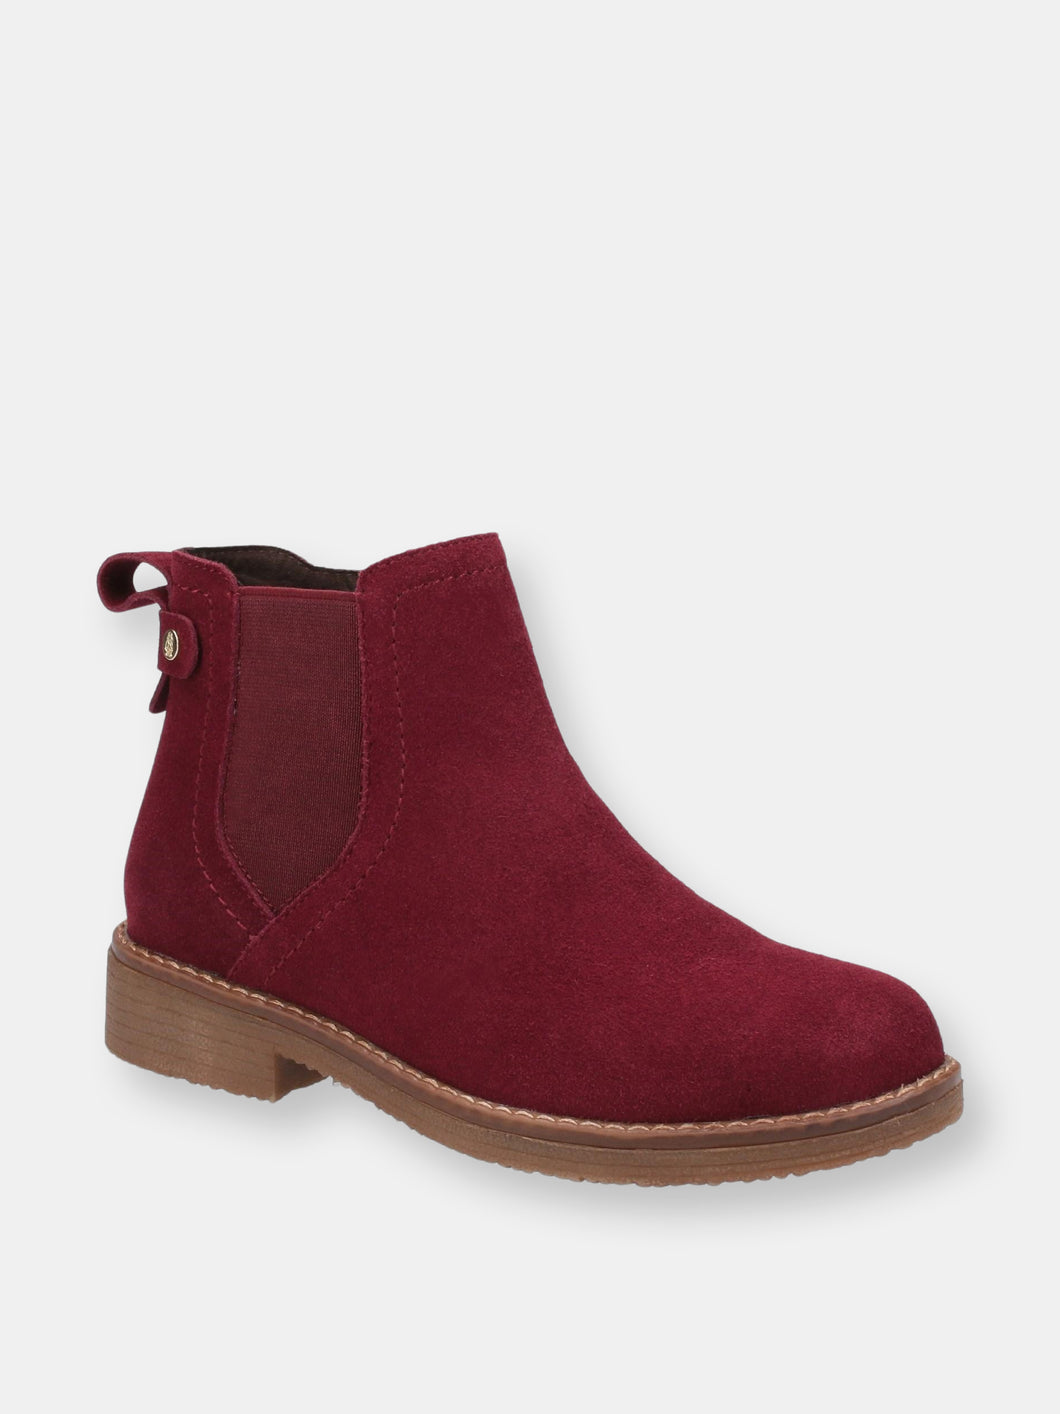 Womens/Ladies Maddy Suede Ankle Boots - Bordeaux Red